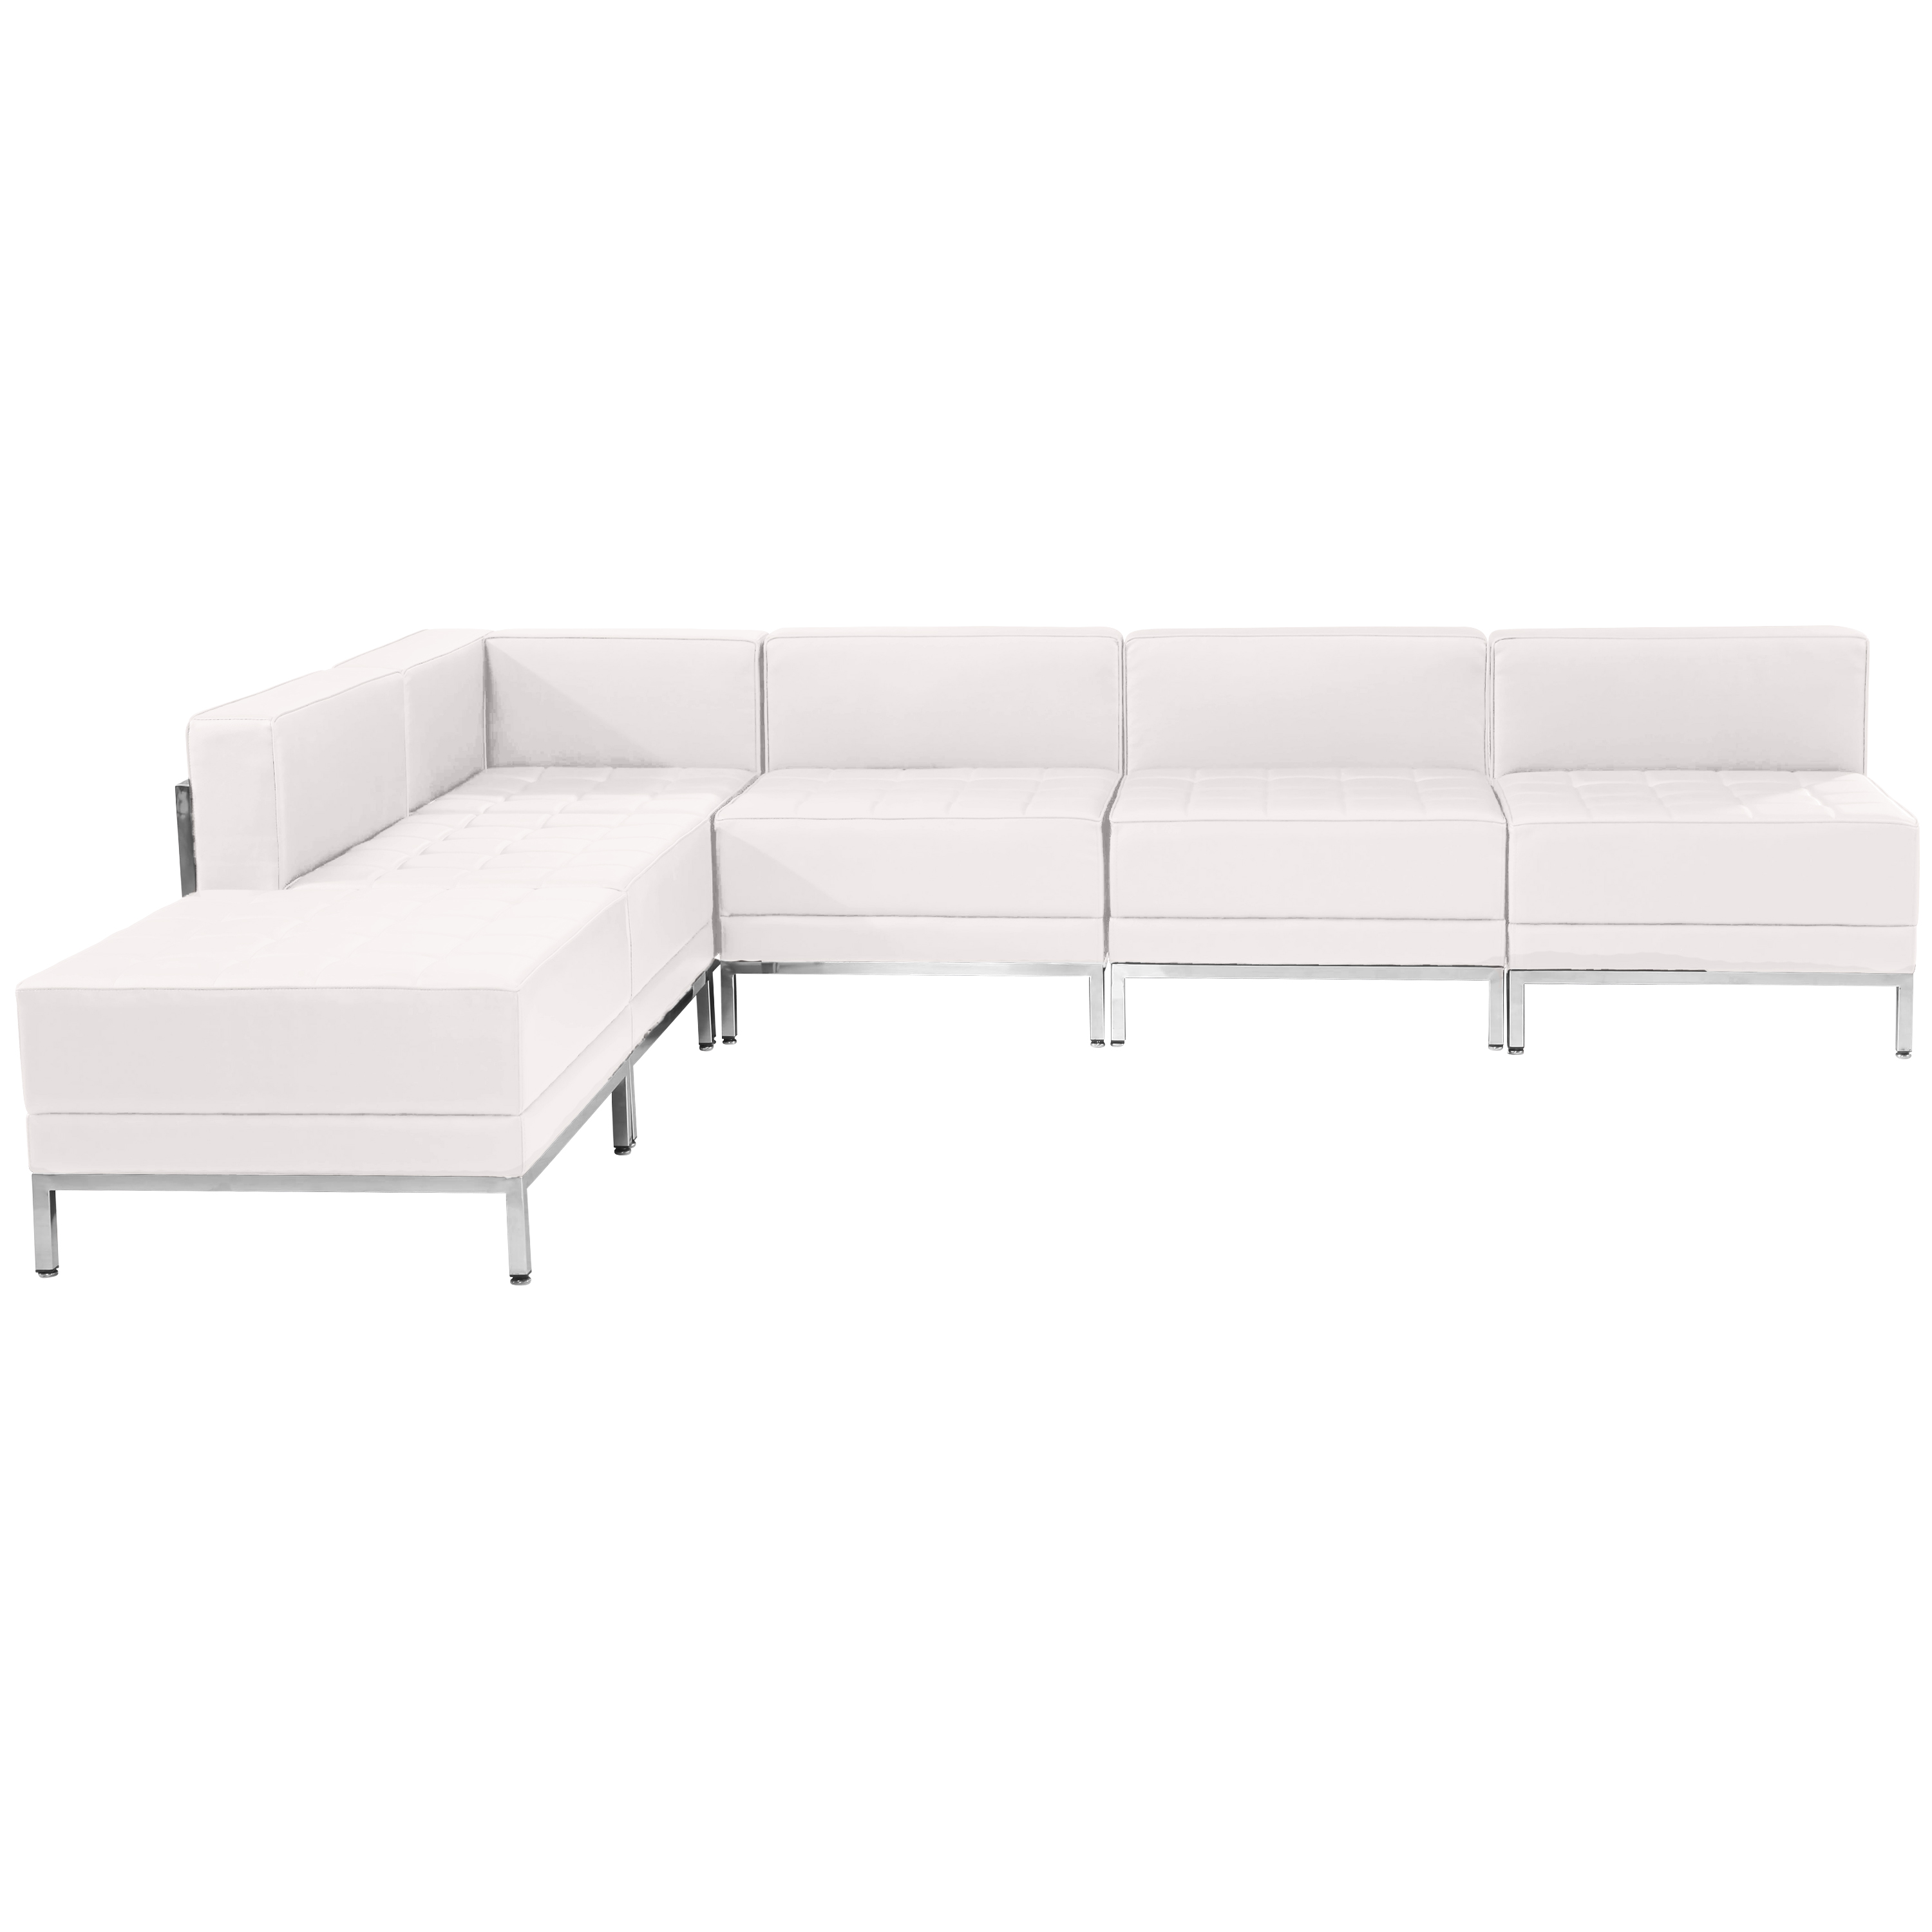 Flash Furniture ZB-IMAG-SECT-SET10-WH-GG Hercules Imagination Series White LeatherSoft Sectional Configuration, 6 Pieces